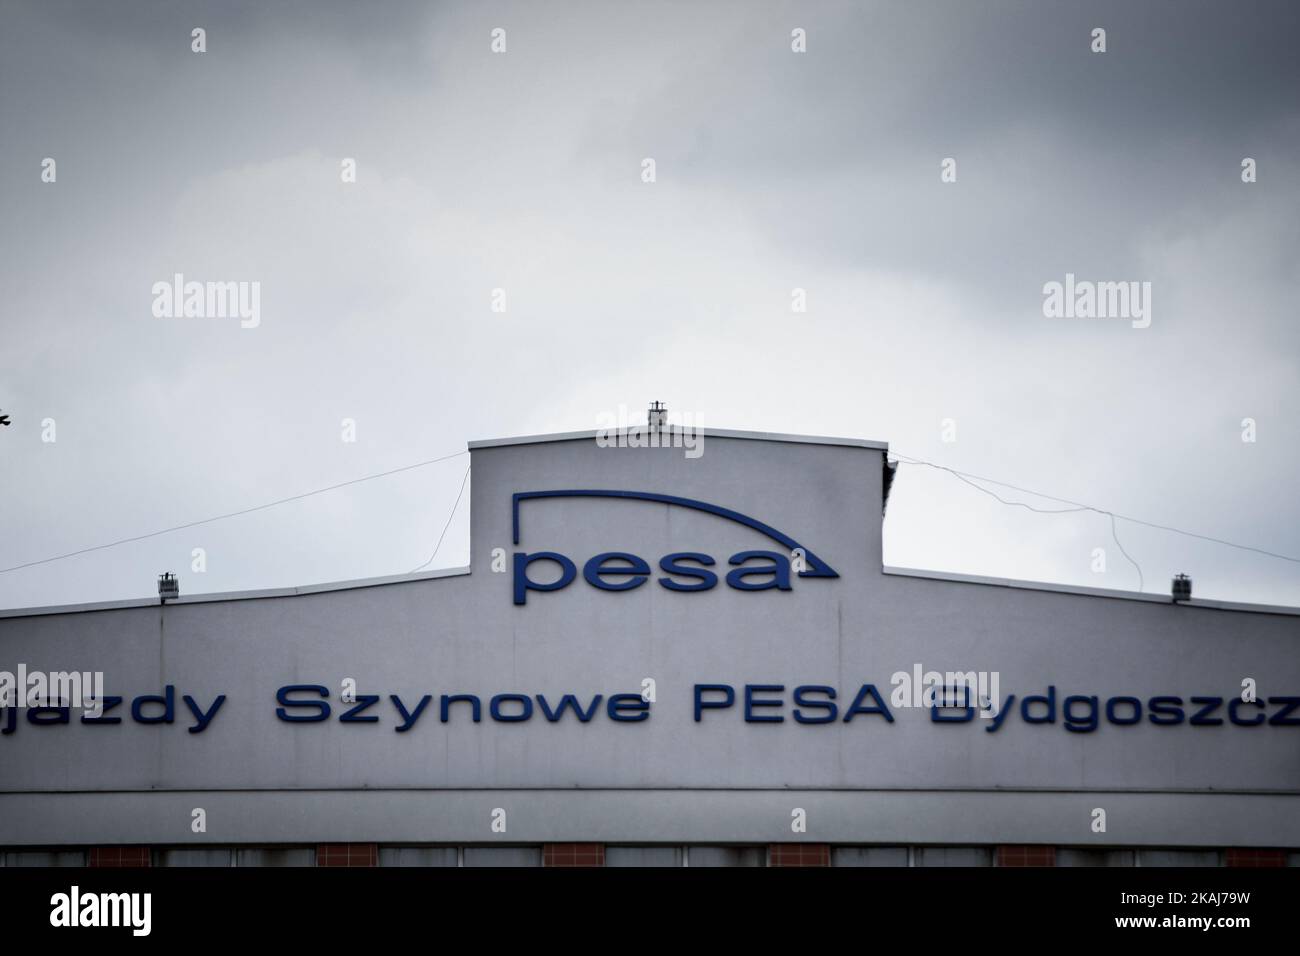 A view of Pesa office in Bydgoszcz, Poland, on April 27, 2016. Polish rail vehicle manufacturer PESA, the largest in Poland and one of the largest in Eastern Europe has said to build a new research and development center costing around €6,3 million. The new center will offer employment to several hundred technical personnel. (Photo by Jaap Arriens/NurPhoto) *** Please Use Credit from Credit Field *** Stock Photo